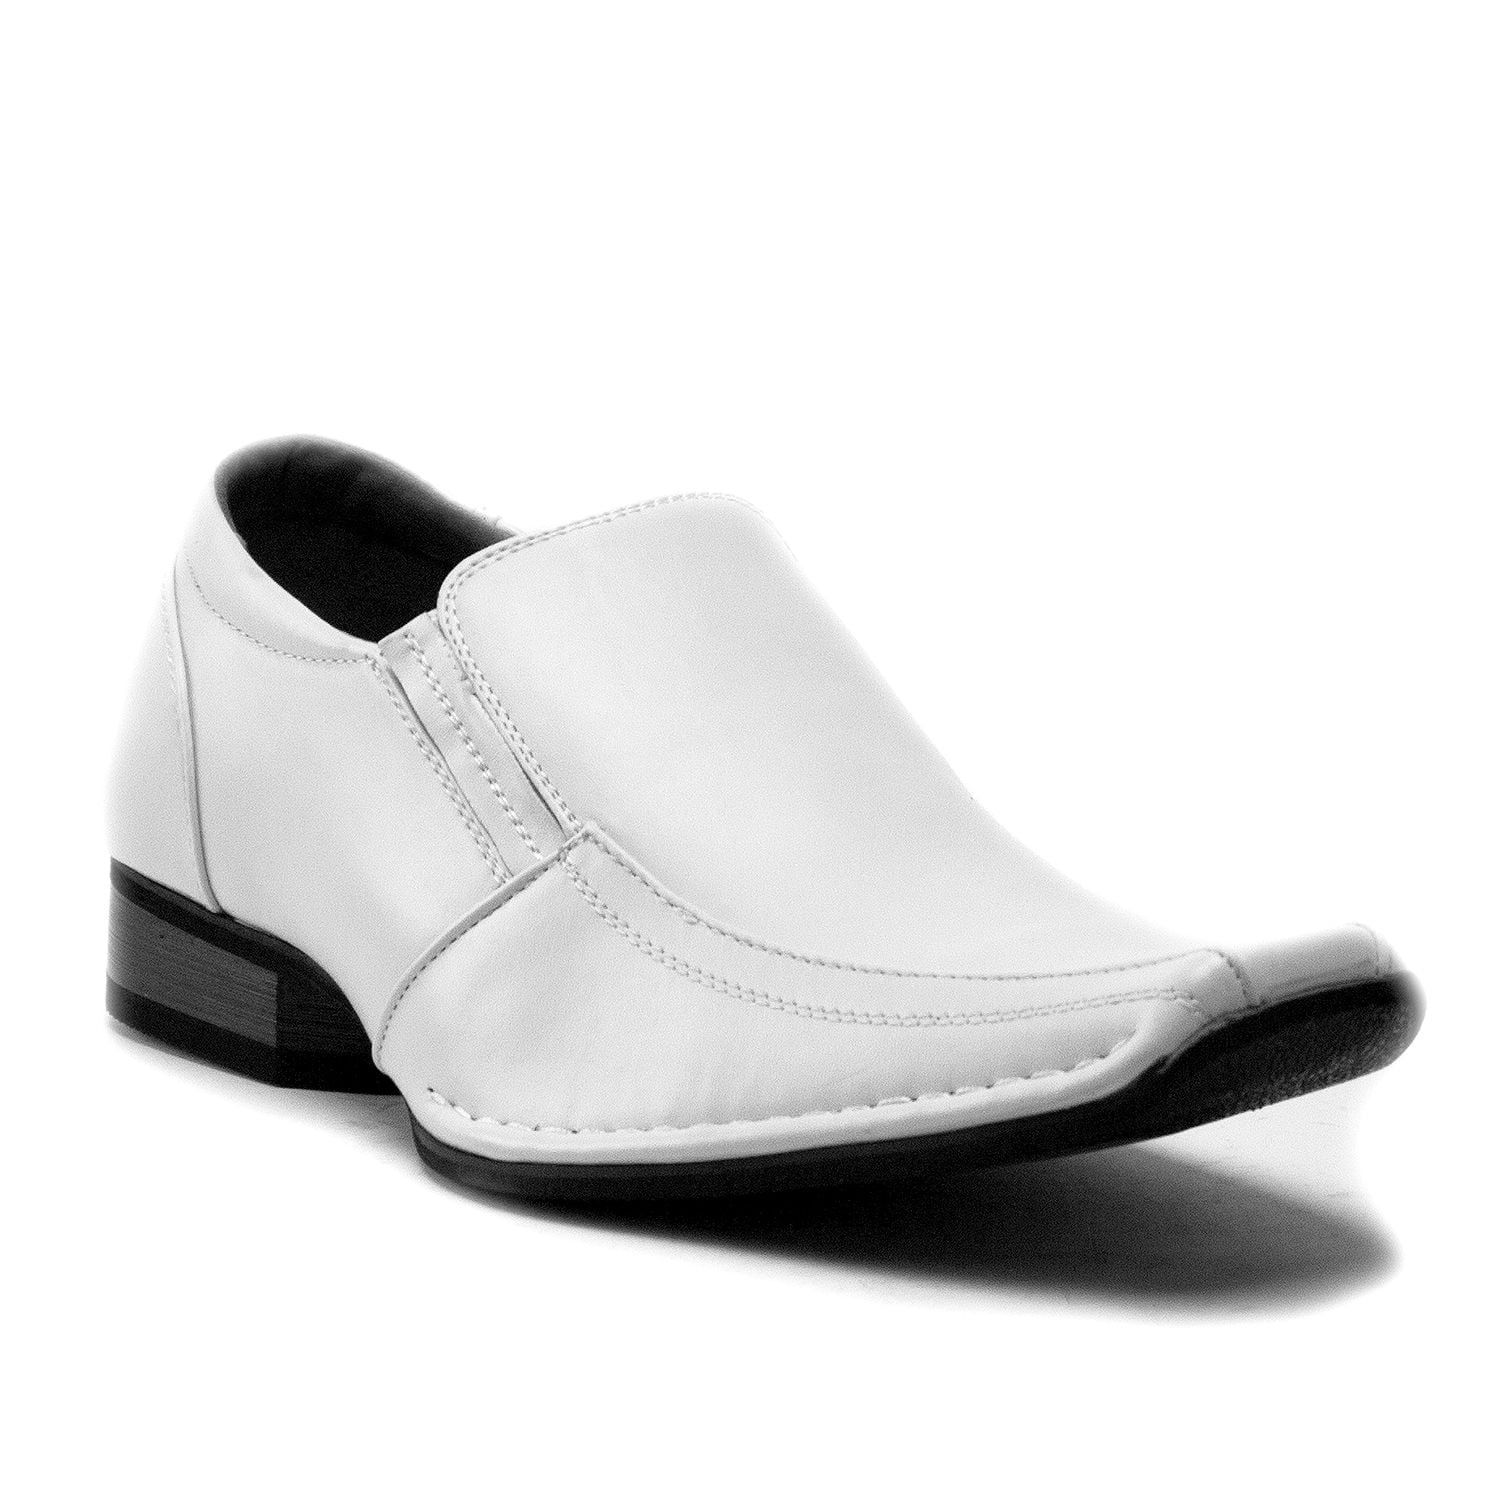 Men's Dress Shoes Men's Classic Formal Business Wedding Slip on Pointed Toe  Leather Shoes Casual Party Prom Dinner Banquet Dress Leather Shoes,White,46EU  : Amazon.co.uk: Fashion